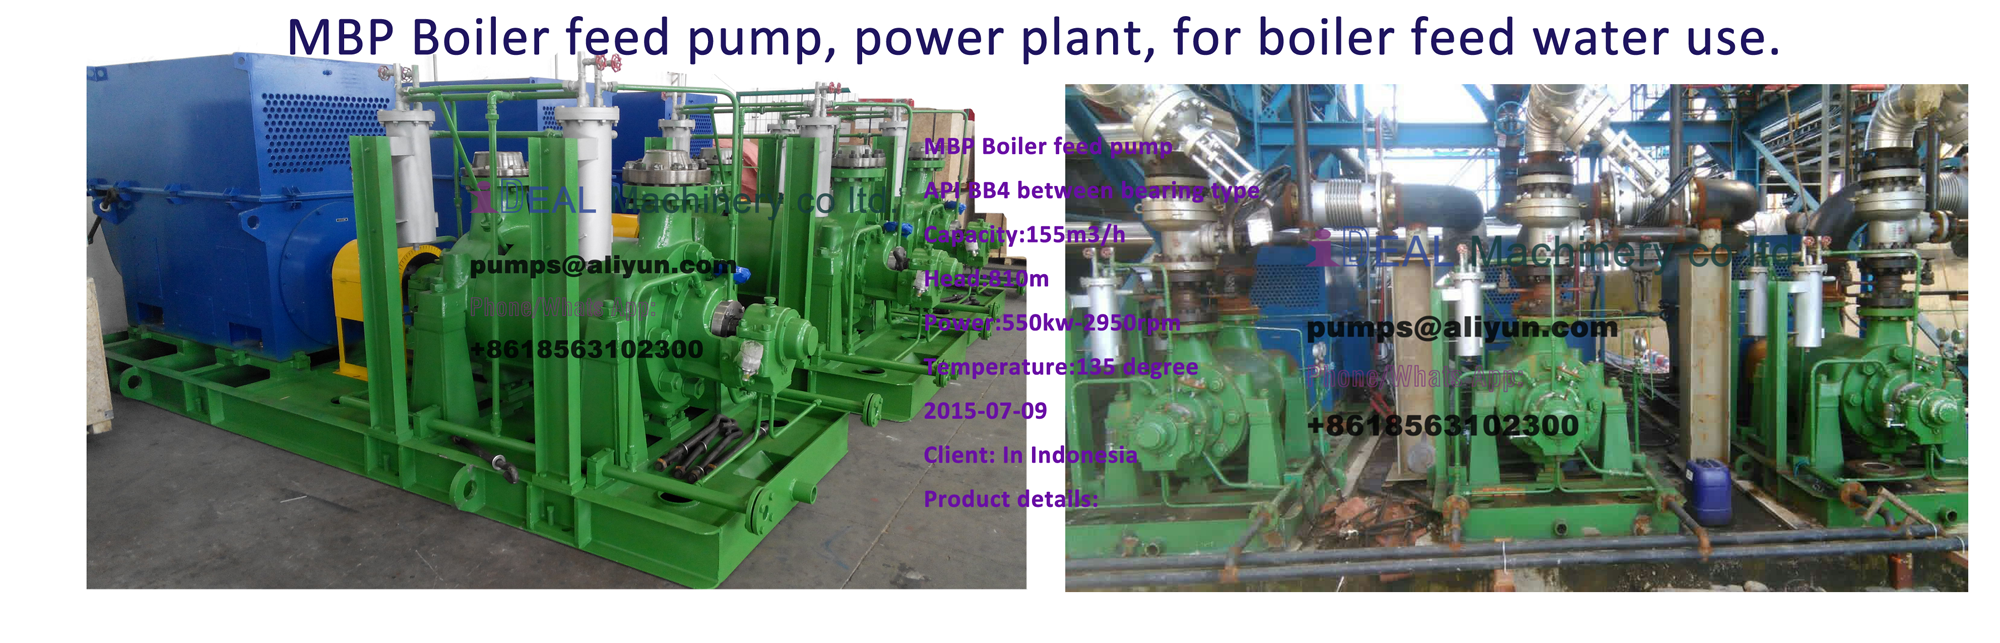 2.MBP160-100-8  450KW-2900RPM together.png